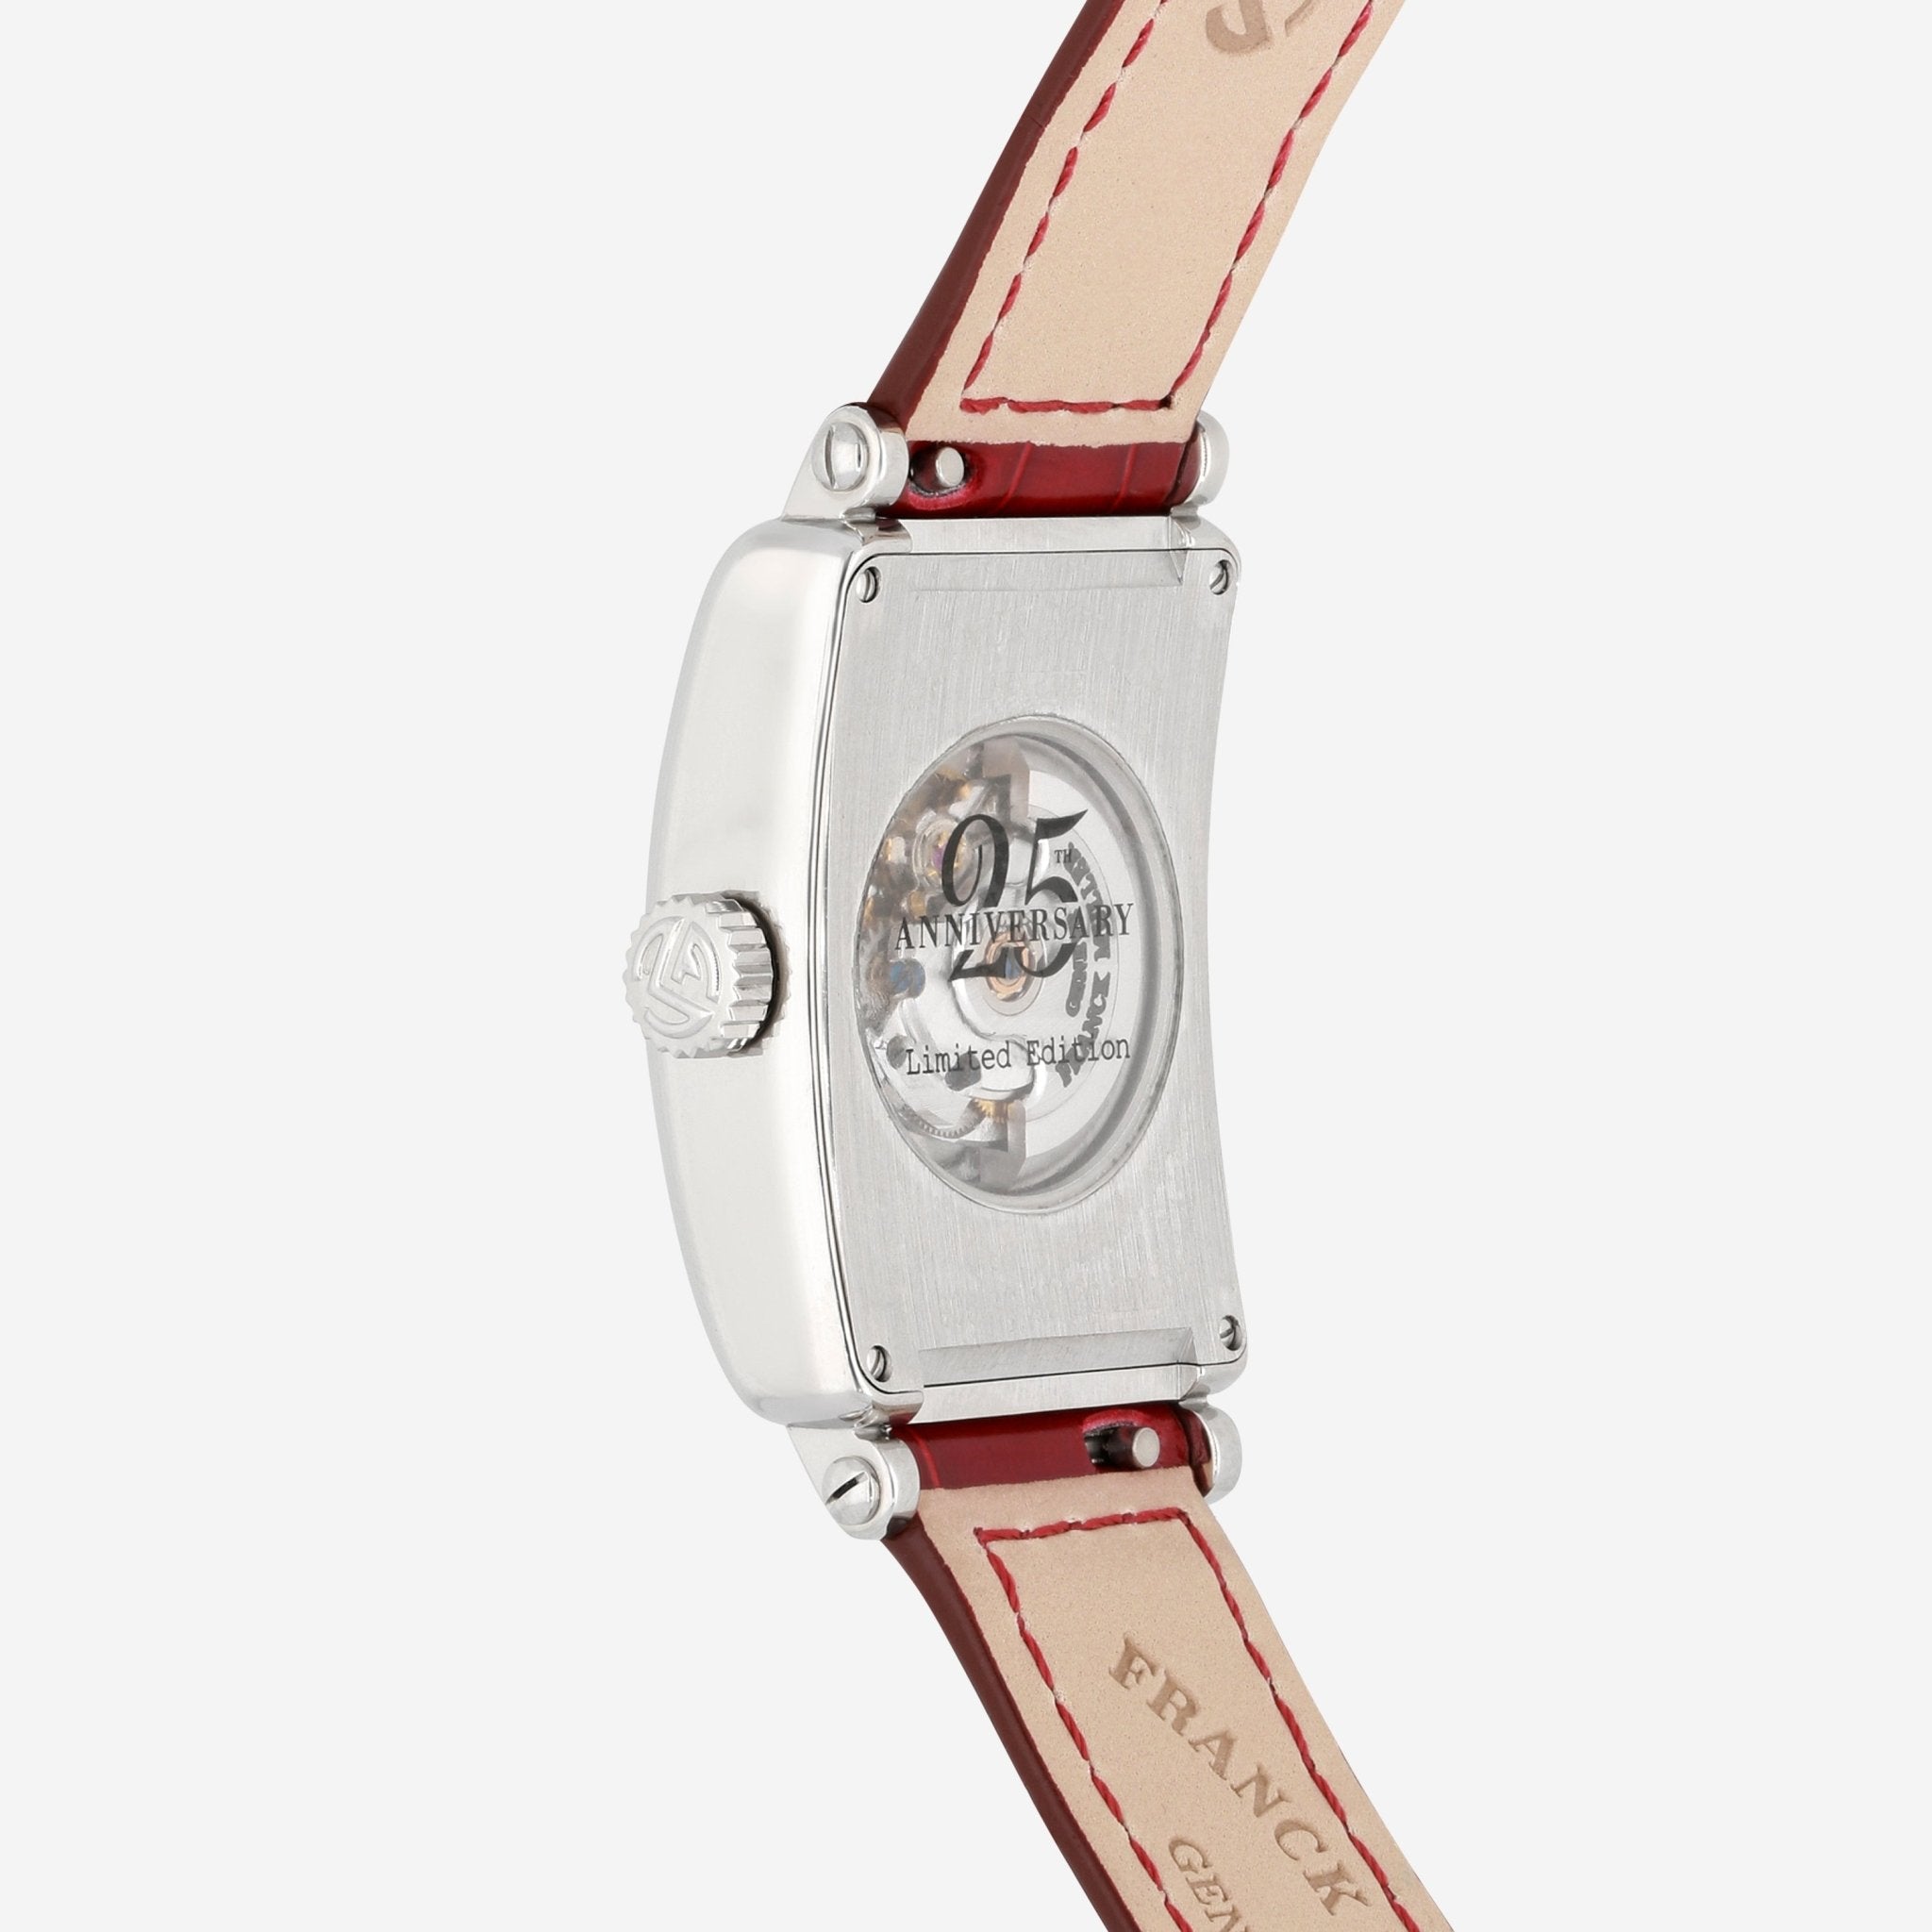 Franck Muller Long Island Silver Dial Automatic Ladies Watch 905SCATFOLTD - THE SOLIST - Franck Muller